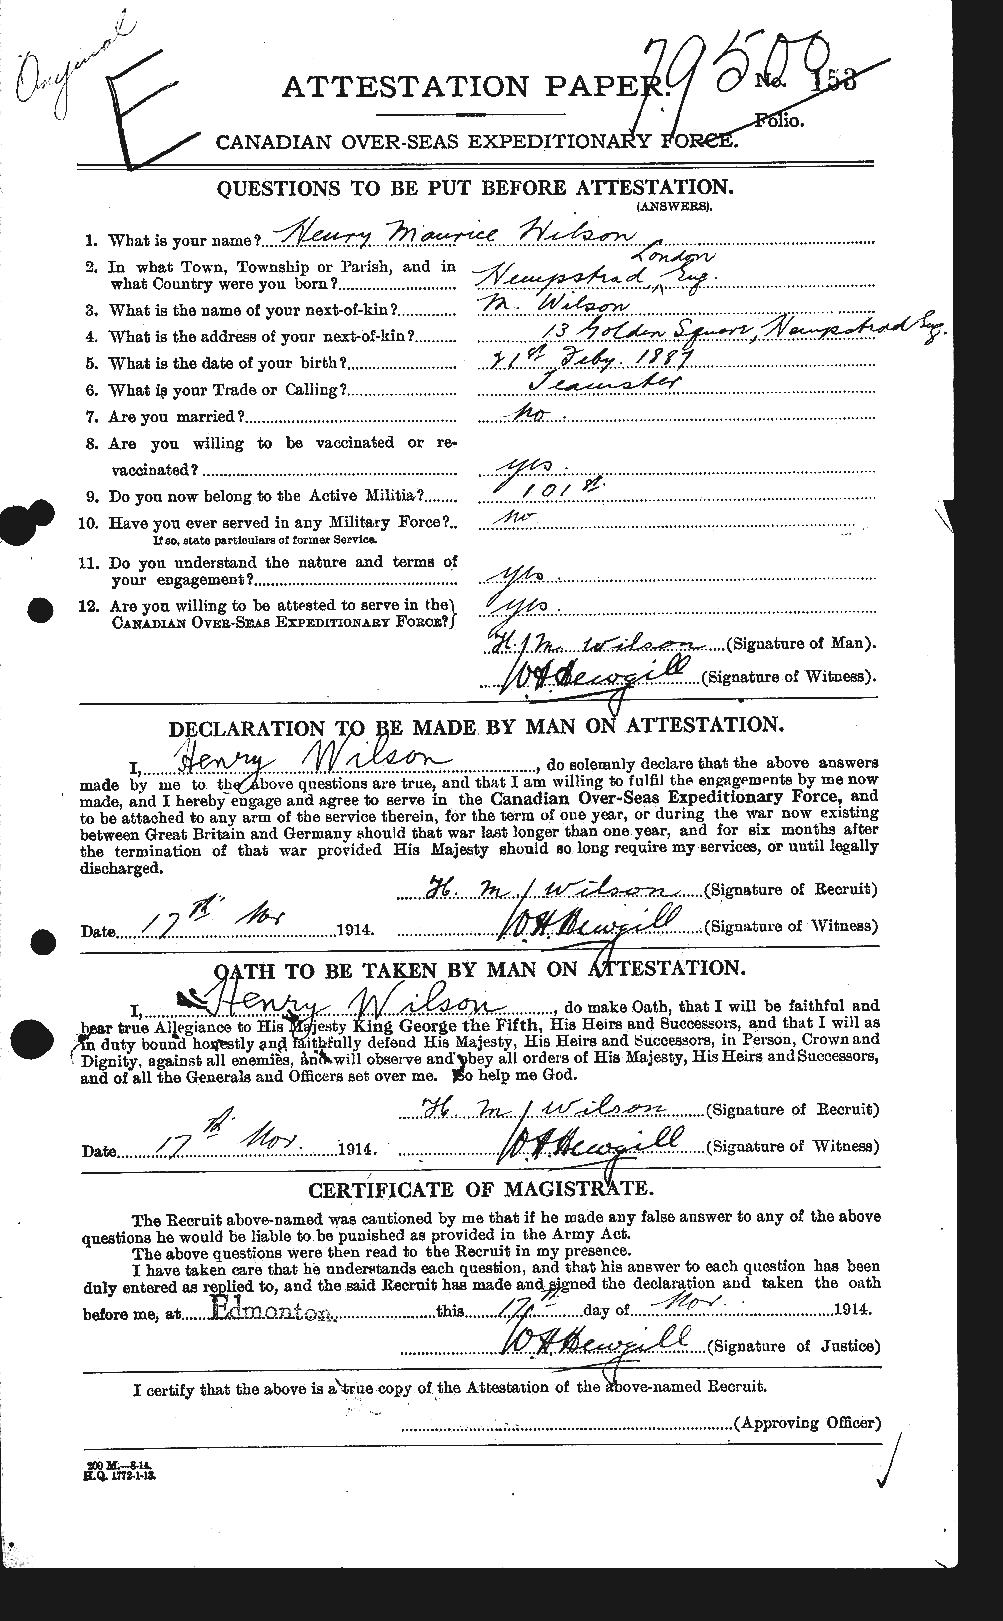 Personnel Records of the First World War - CEF 679535a